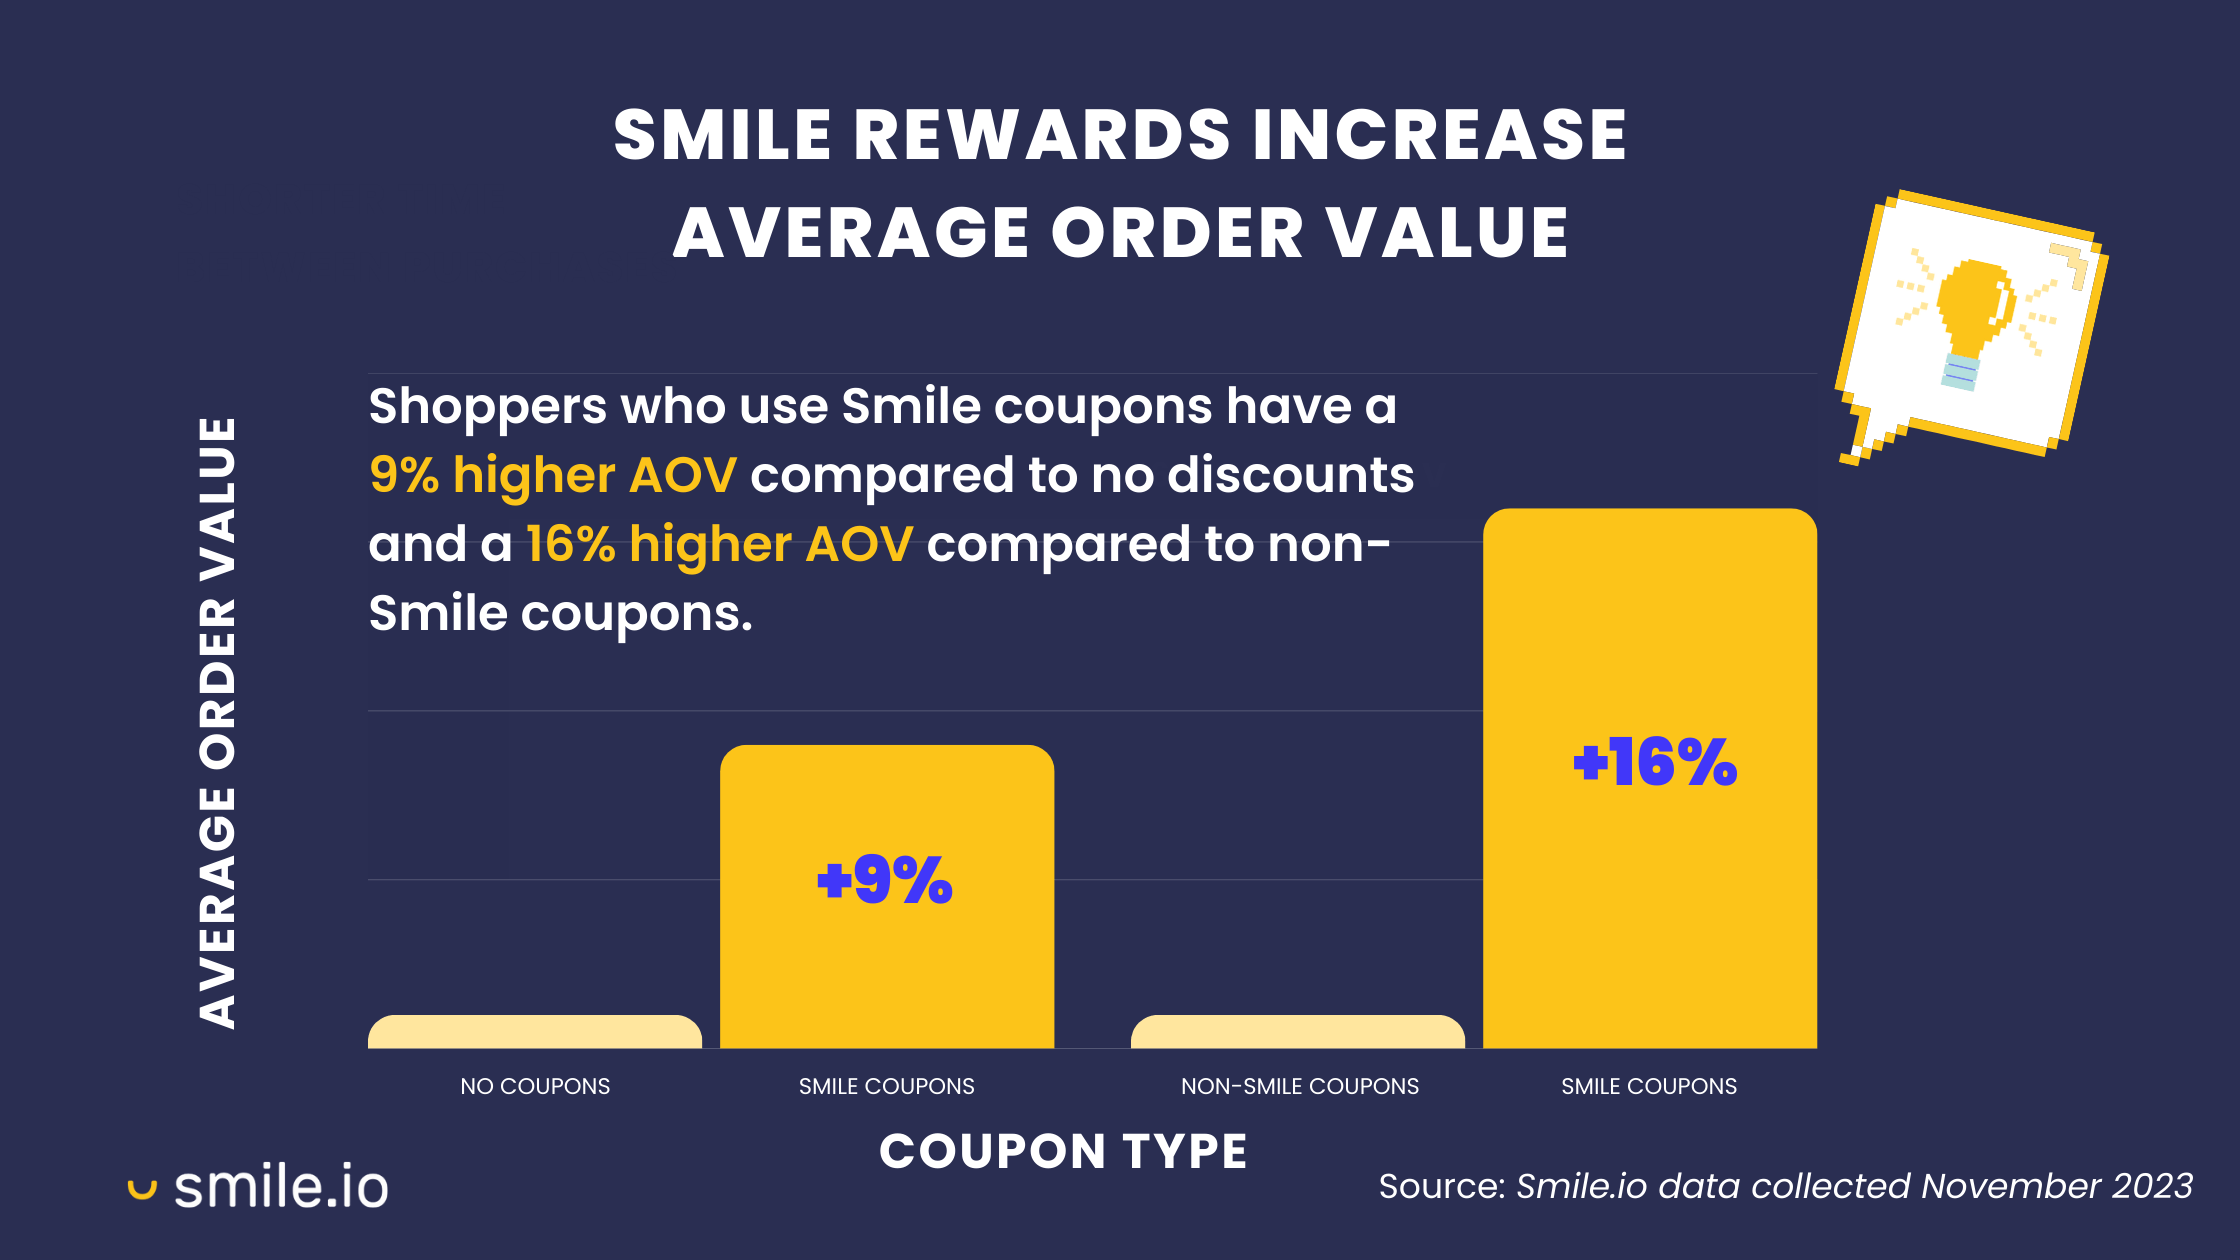 A bar chart showing how the coupon type affects average order value. It has 2 data series: no coupons vs. Smile coupons (AOV is 9% higher for Smile coupons), and non-Smile coupons vs. Smile coupons (AOV is 16% higher for Smile coupons). 